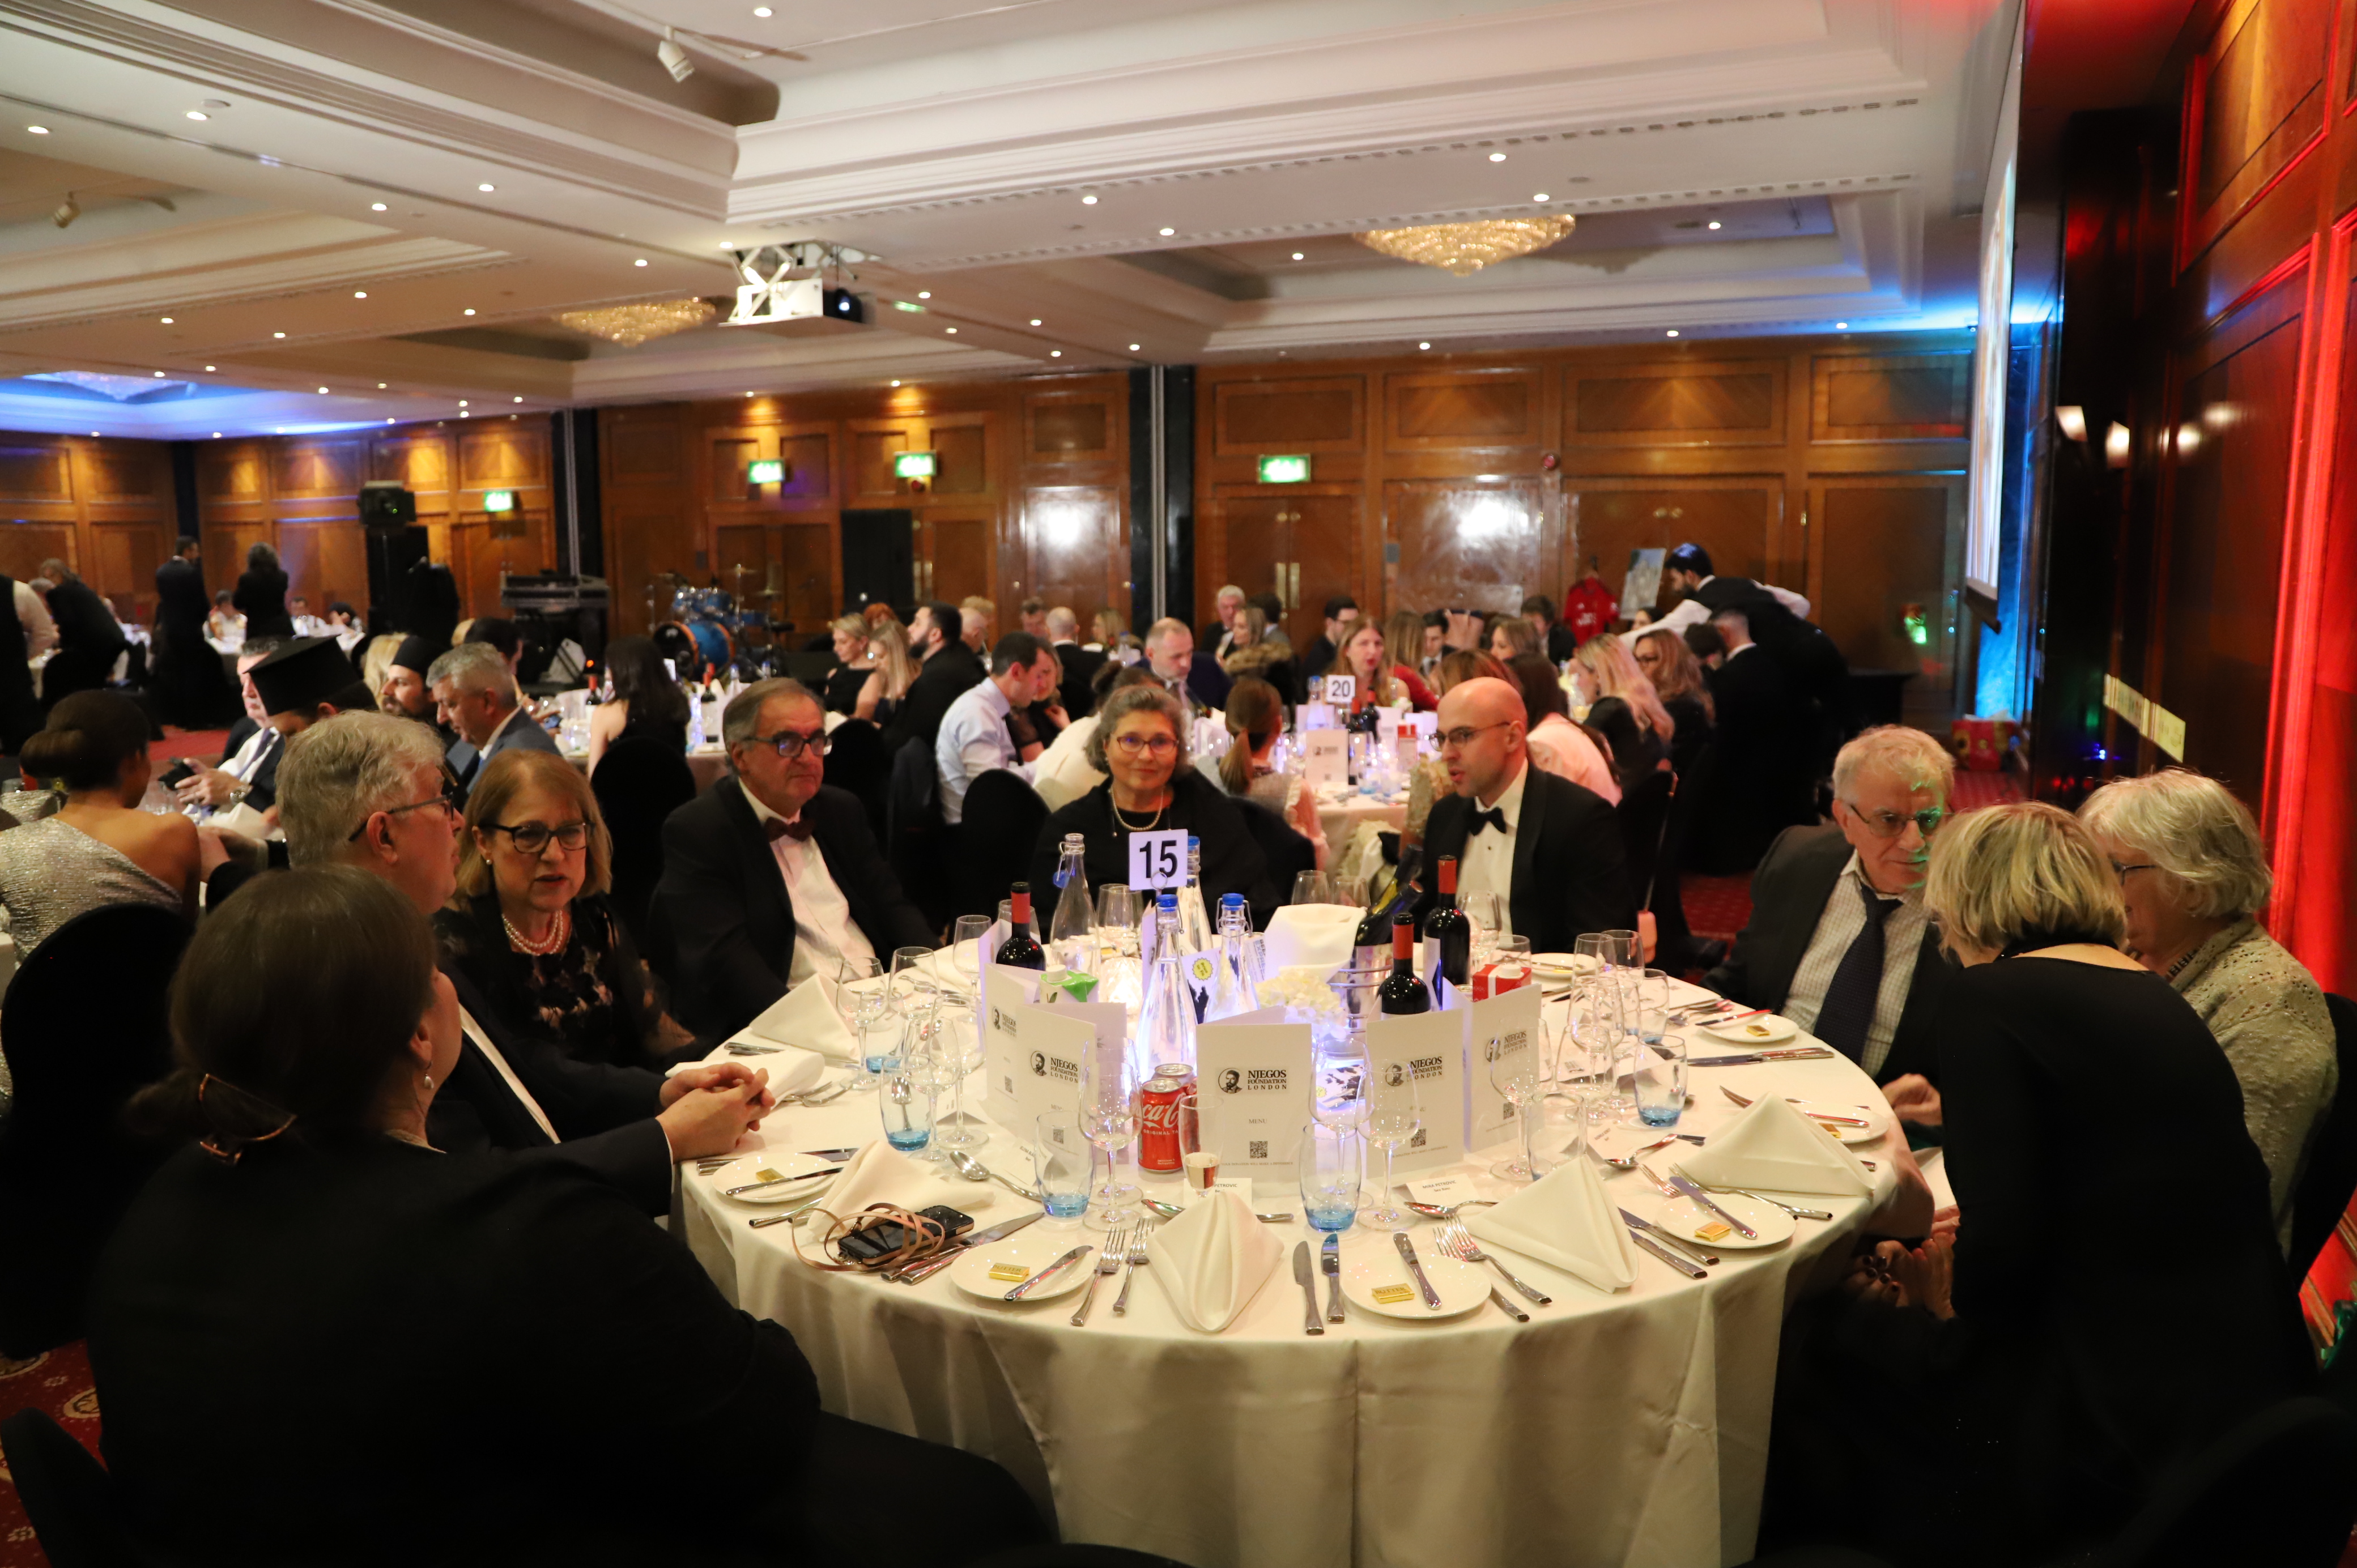 Triumphant St Sava's Ball 2024 breaks its charity fund record - Date for next year's ball revealed